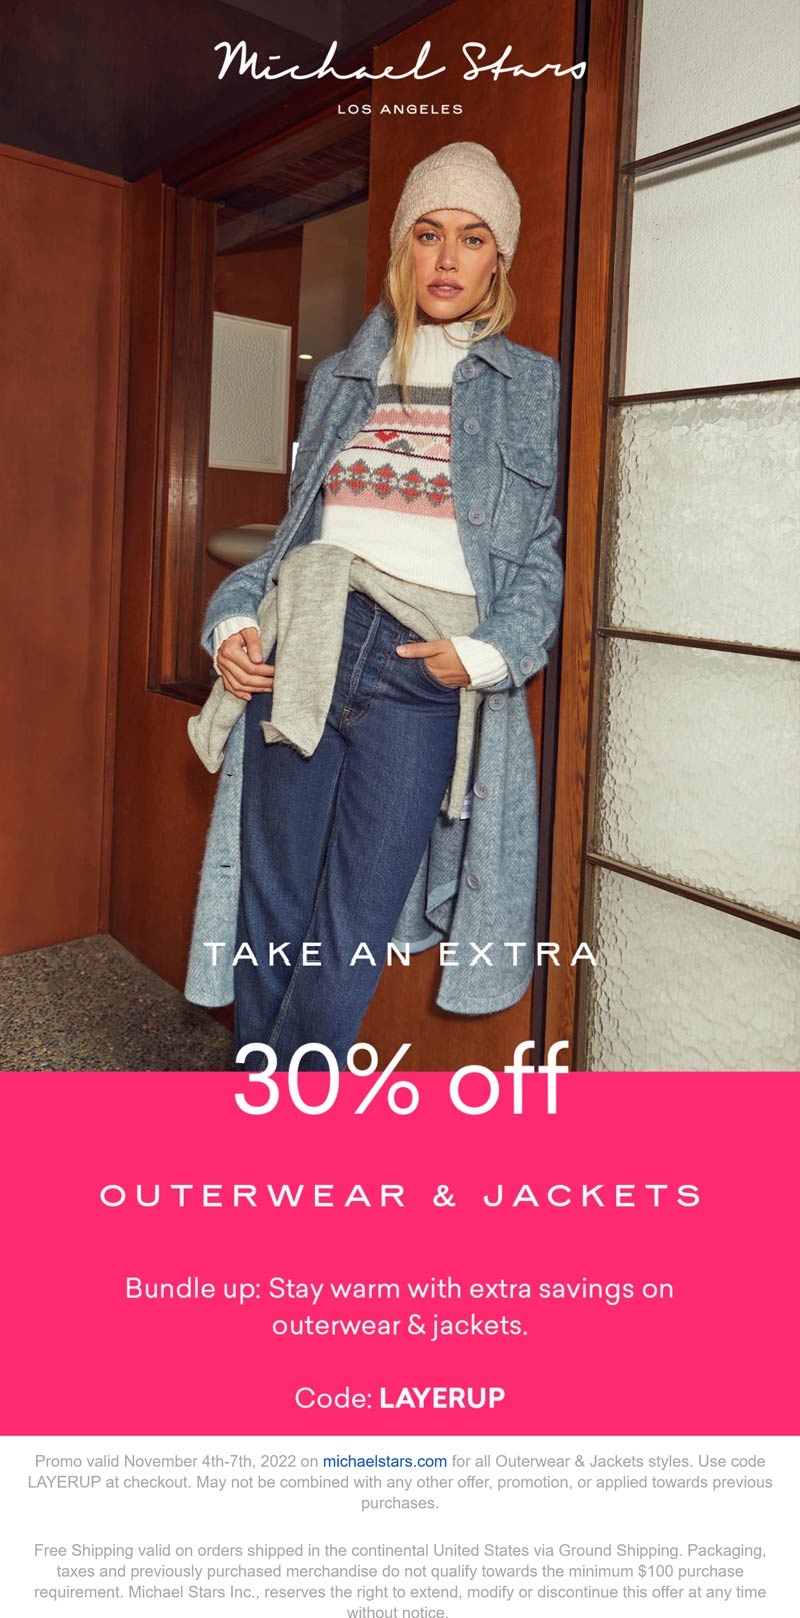 Michael Stars stores Coupon  30% off outerwear at Michael Stars via promo code LAYERUP #michaelstars 